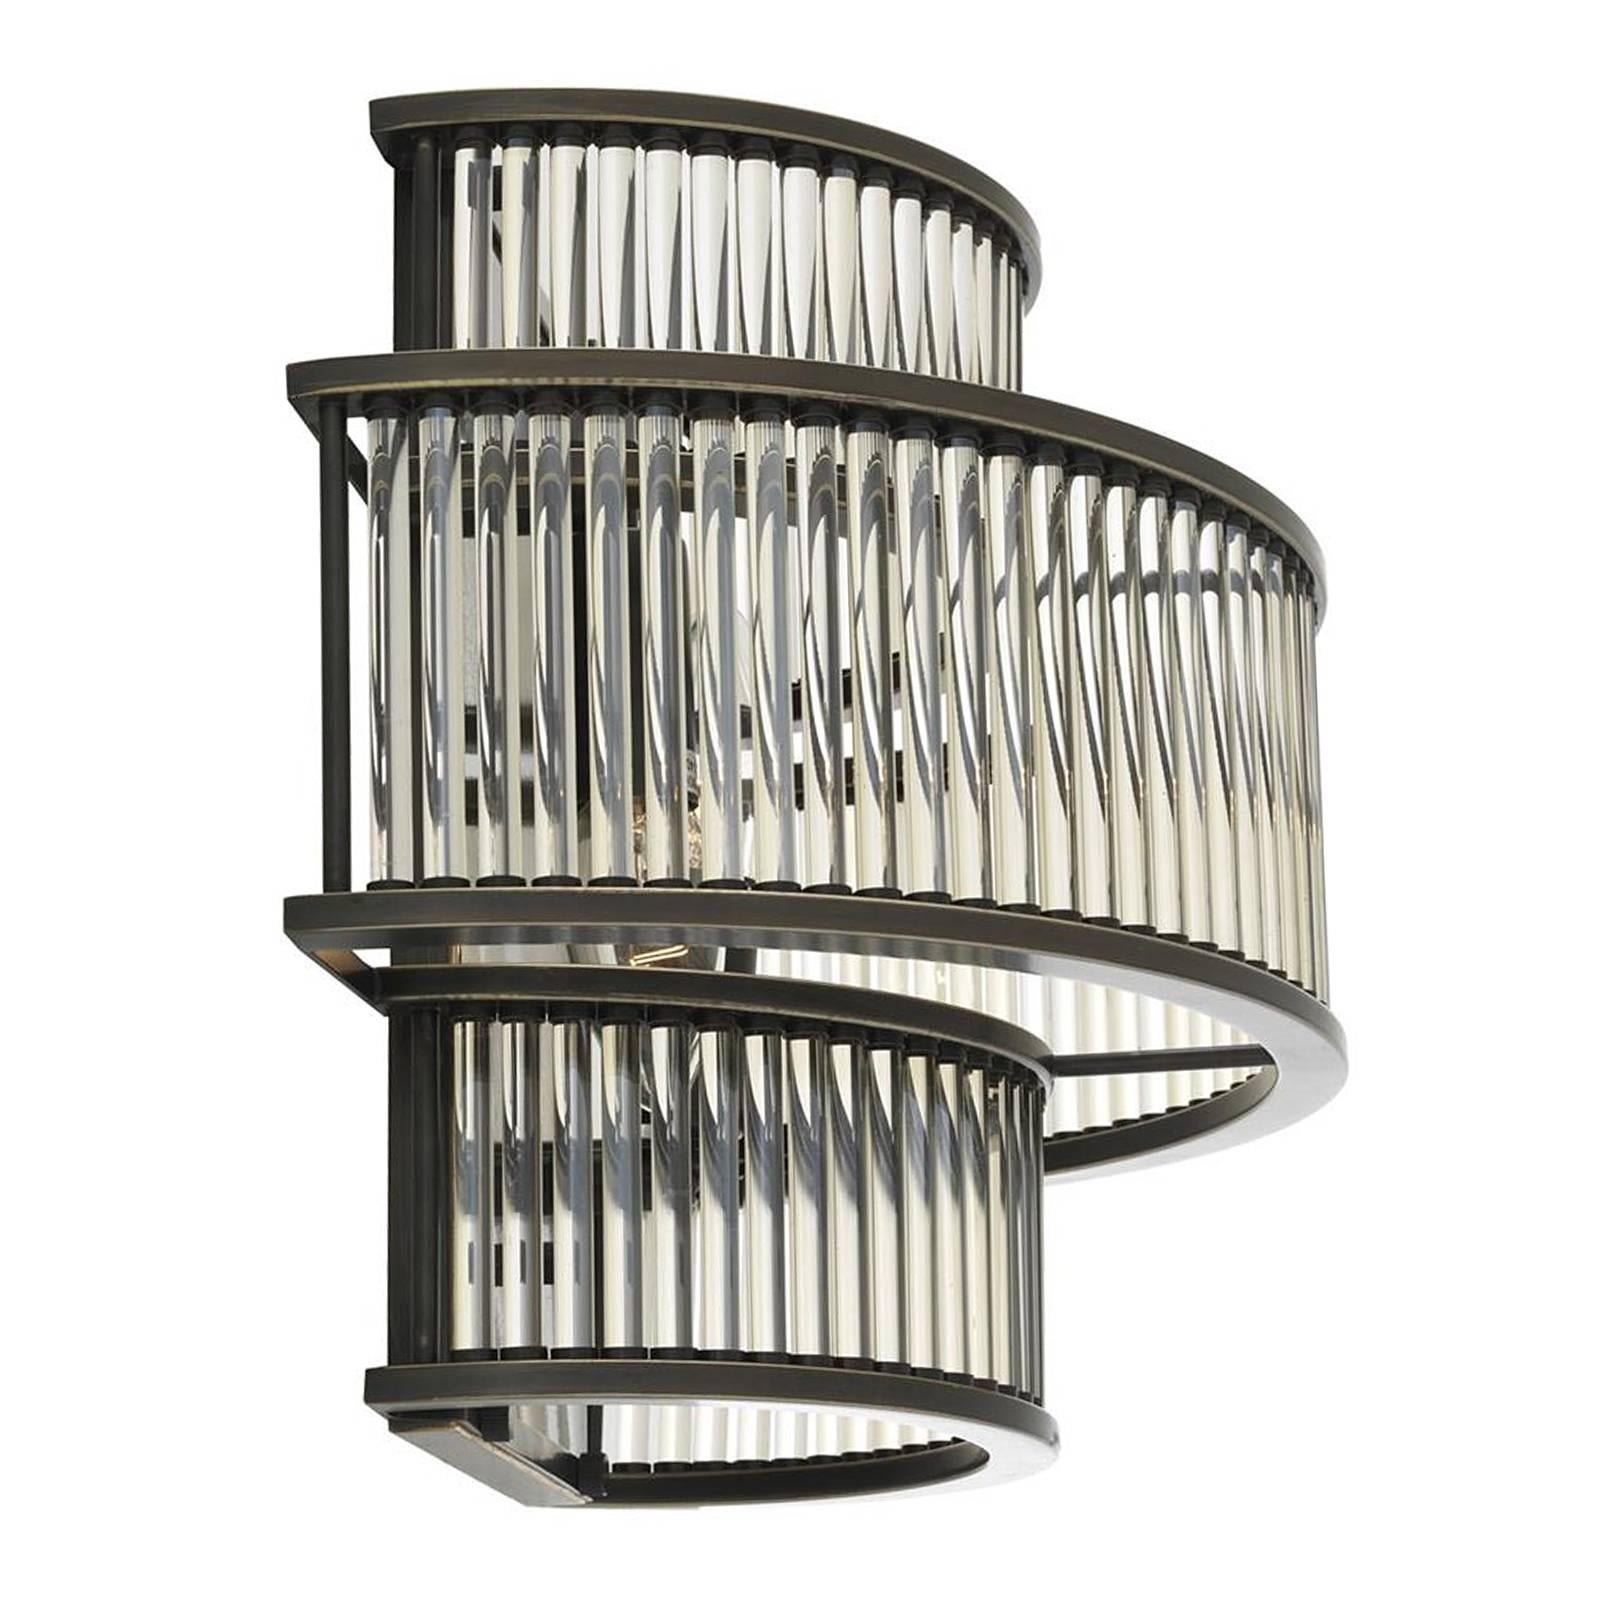 Hand-Crafted Glass Stairs Wall Lamp in Bronze Highlight Finish or in Nickel Finish